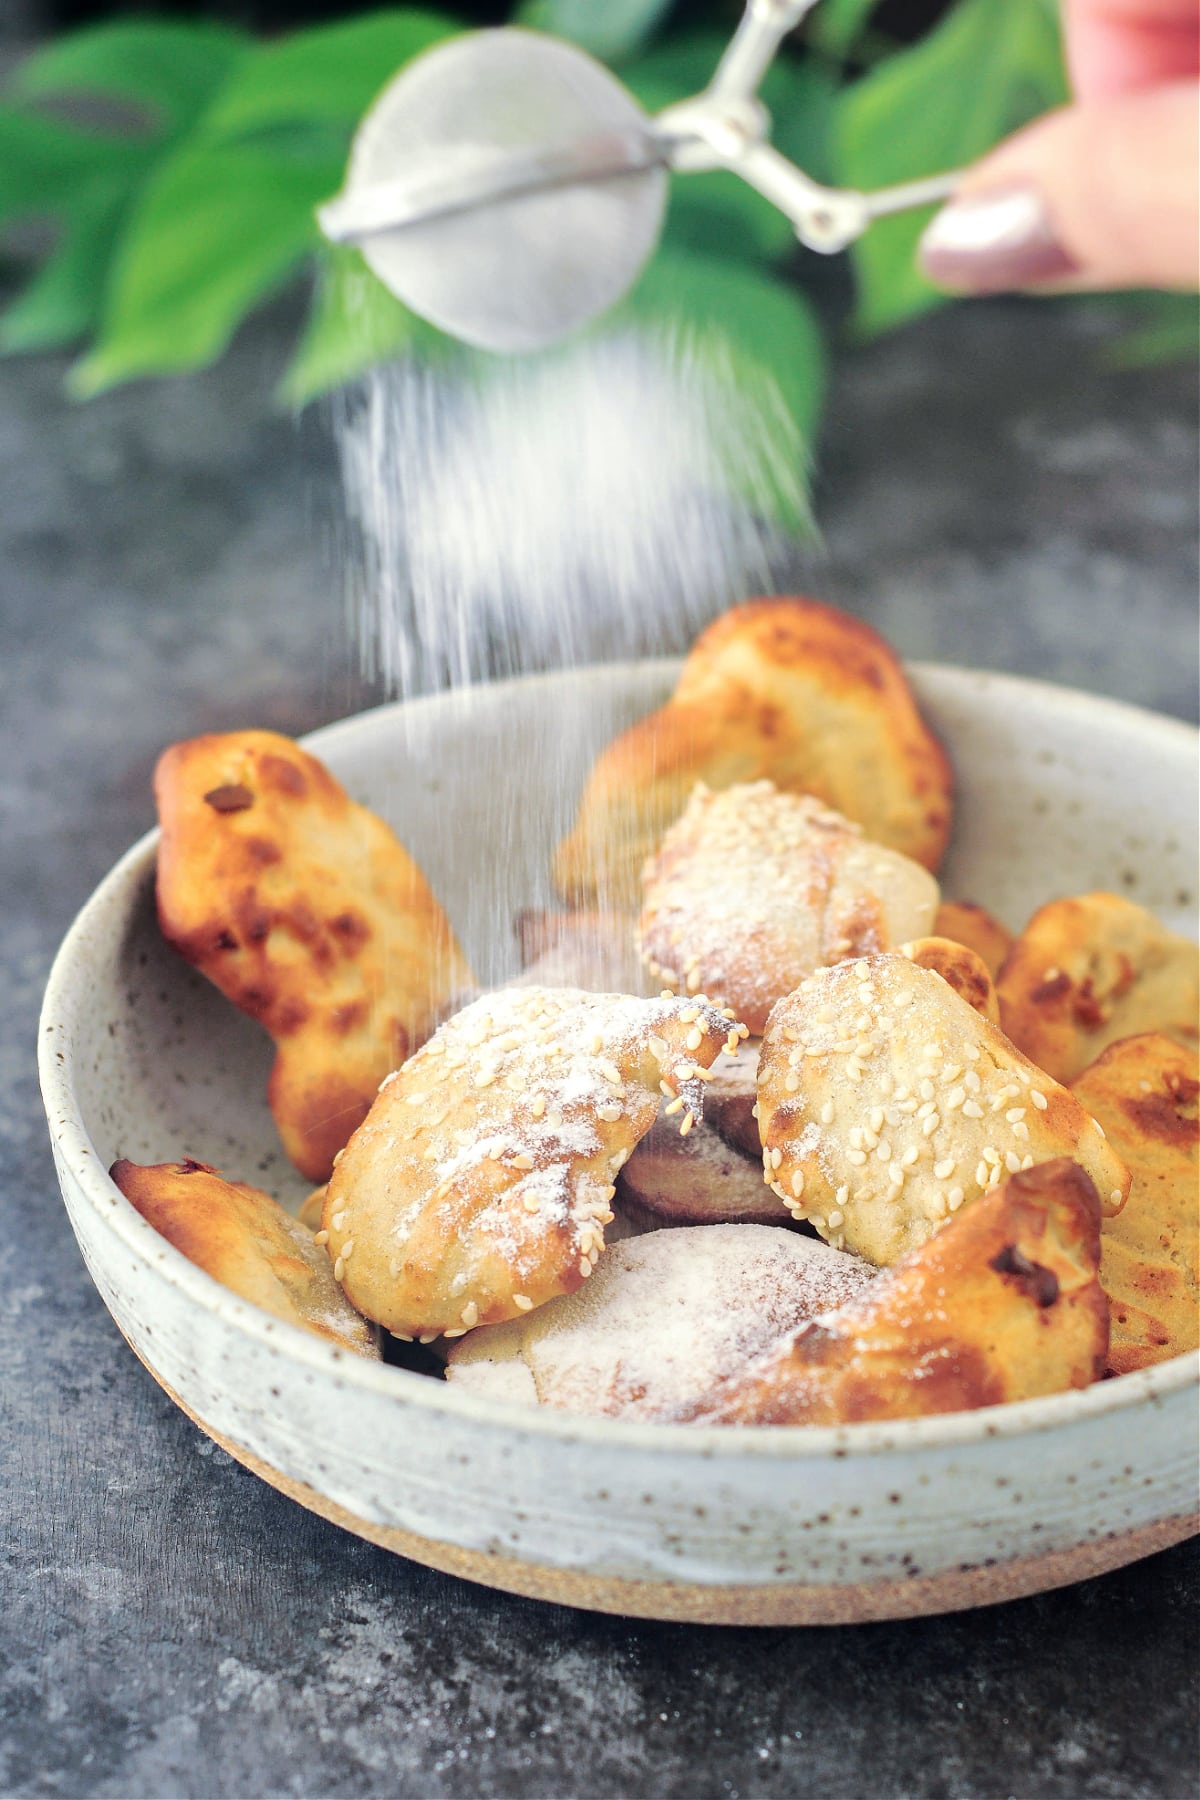 A hand holds a mesh strainer and dusts golden fried banana fritters in a shallow bowl.